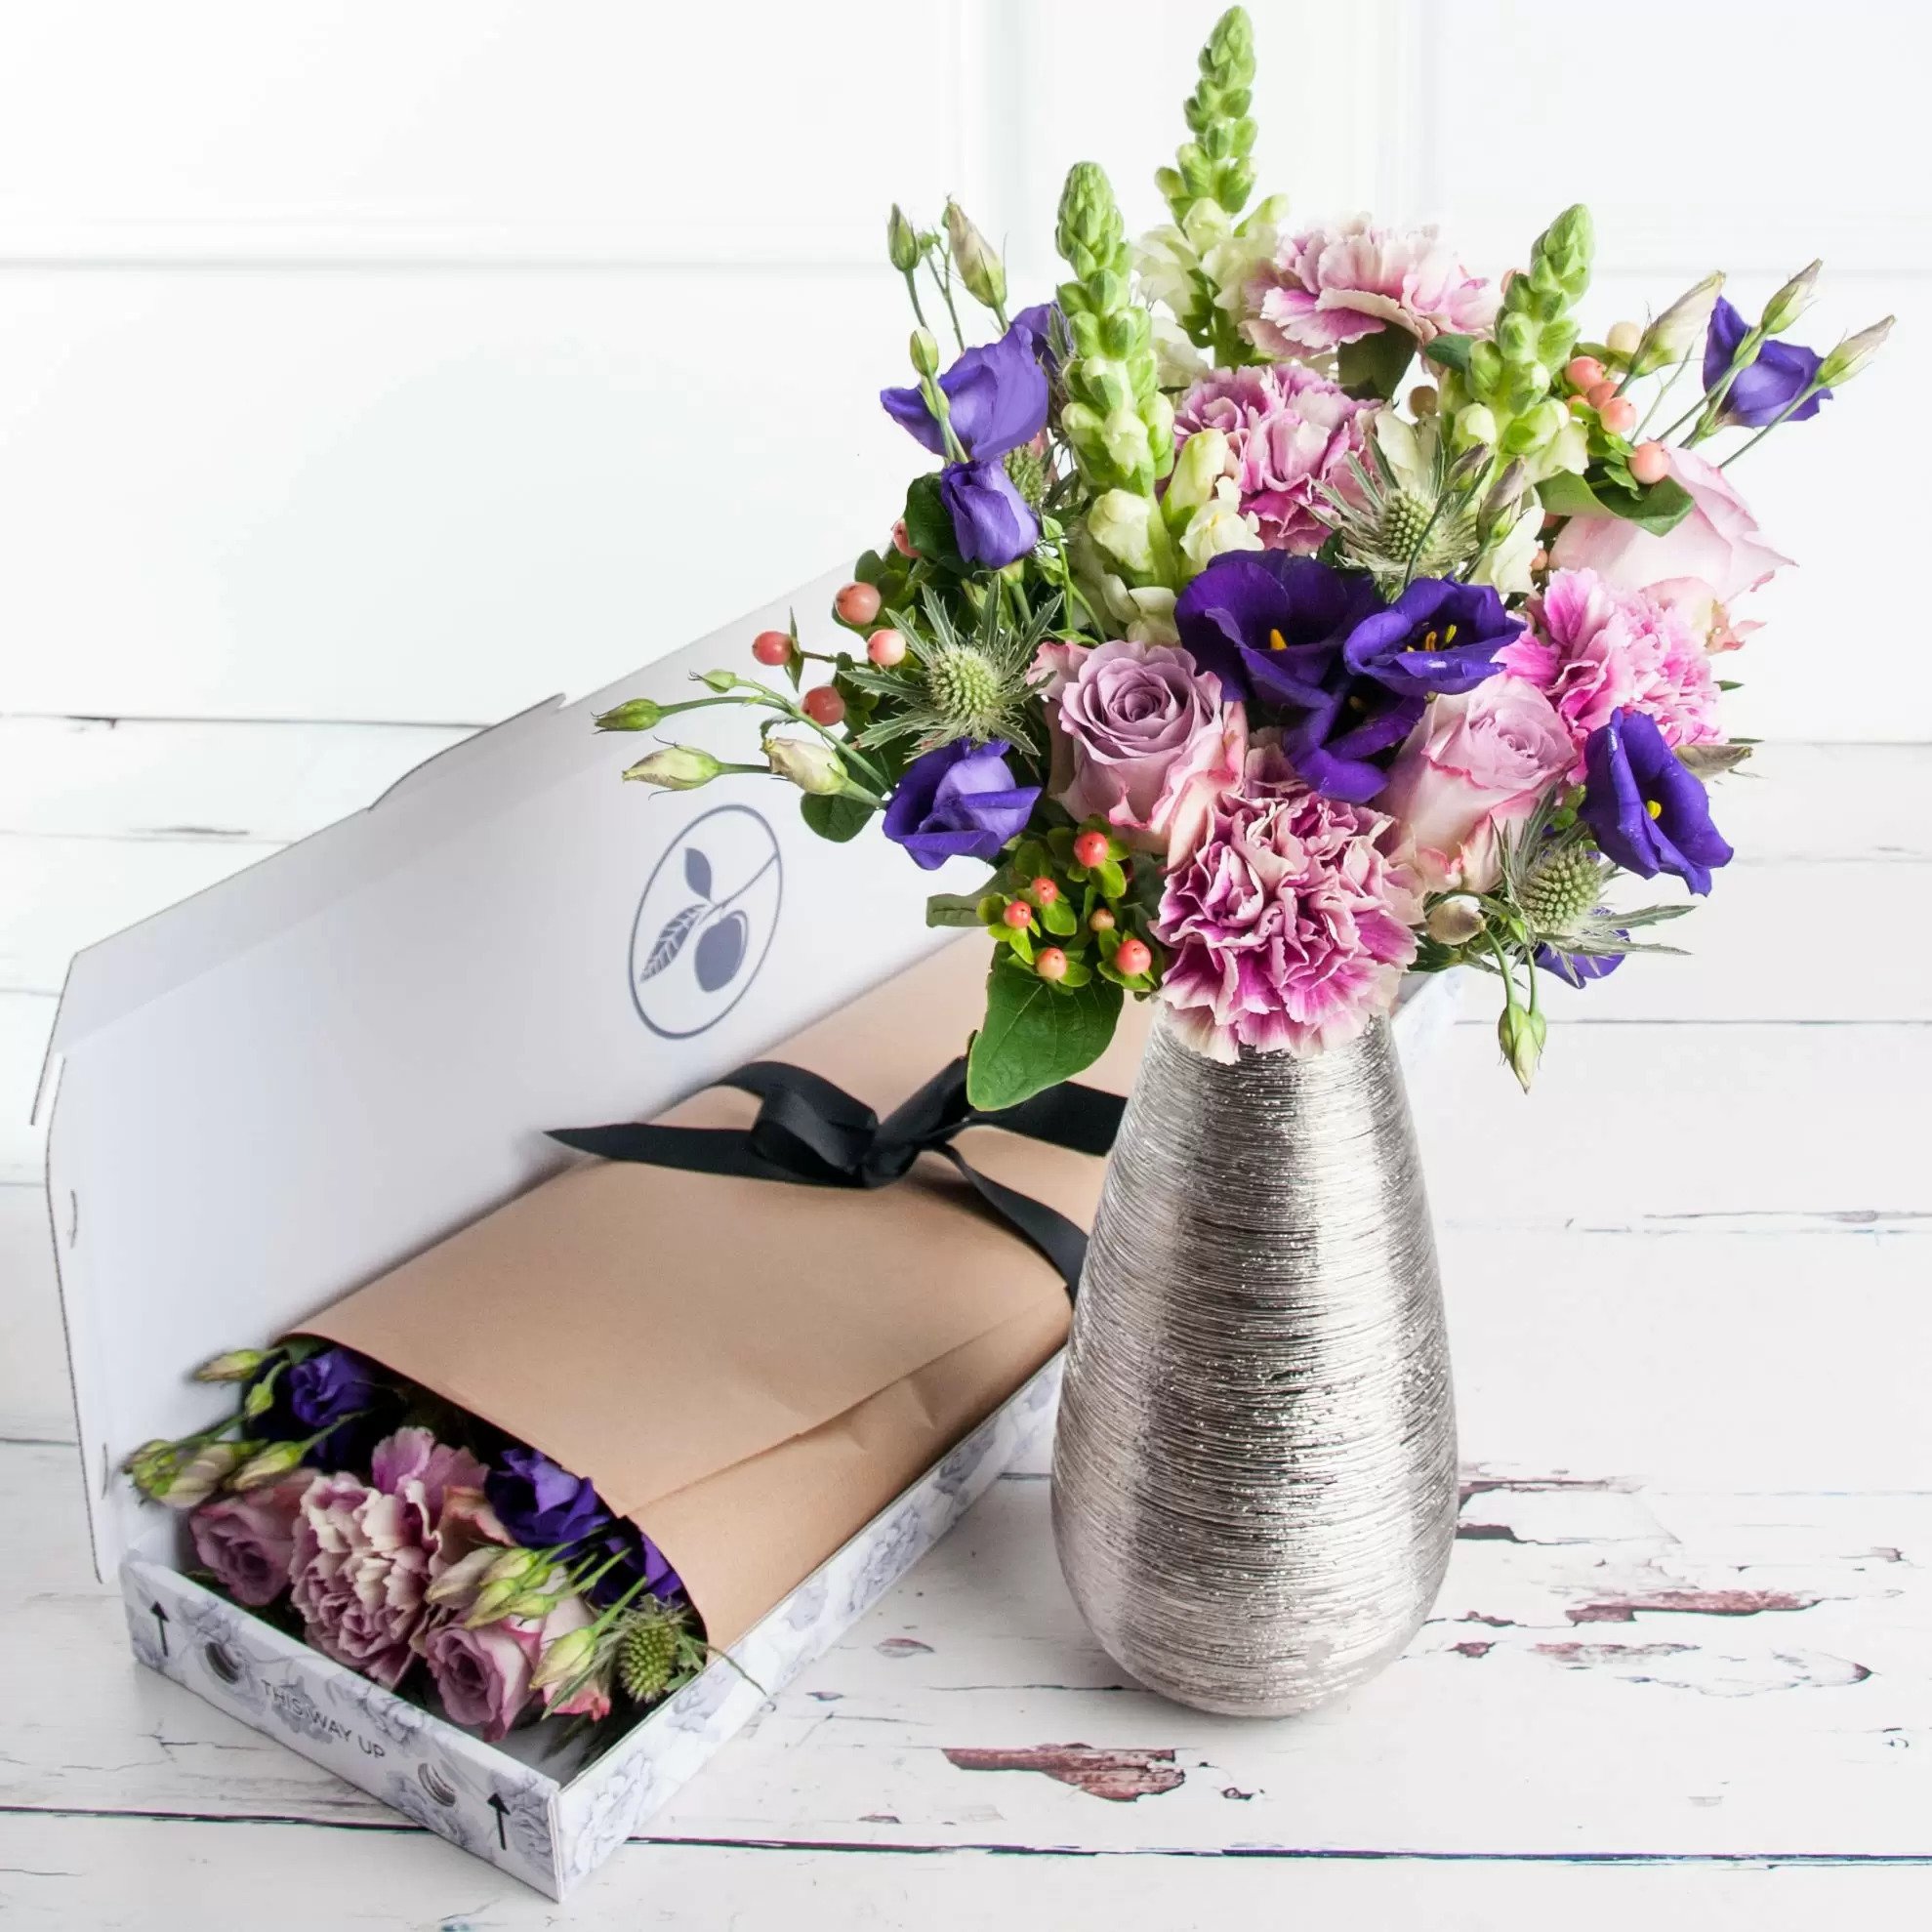 A letterbox bouquet of pink carnations, purple lisianthus, snapdragons, and lilac roses, displayed in a vase next to letterbox packaging.